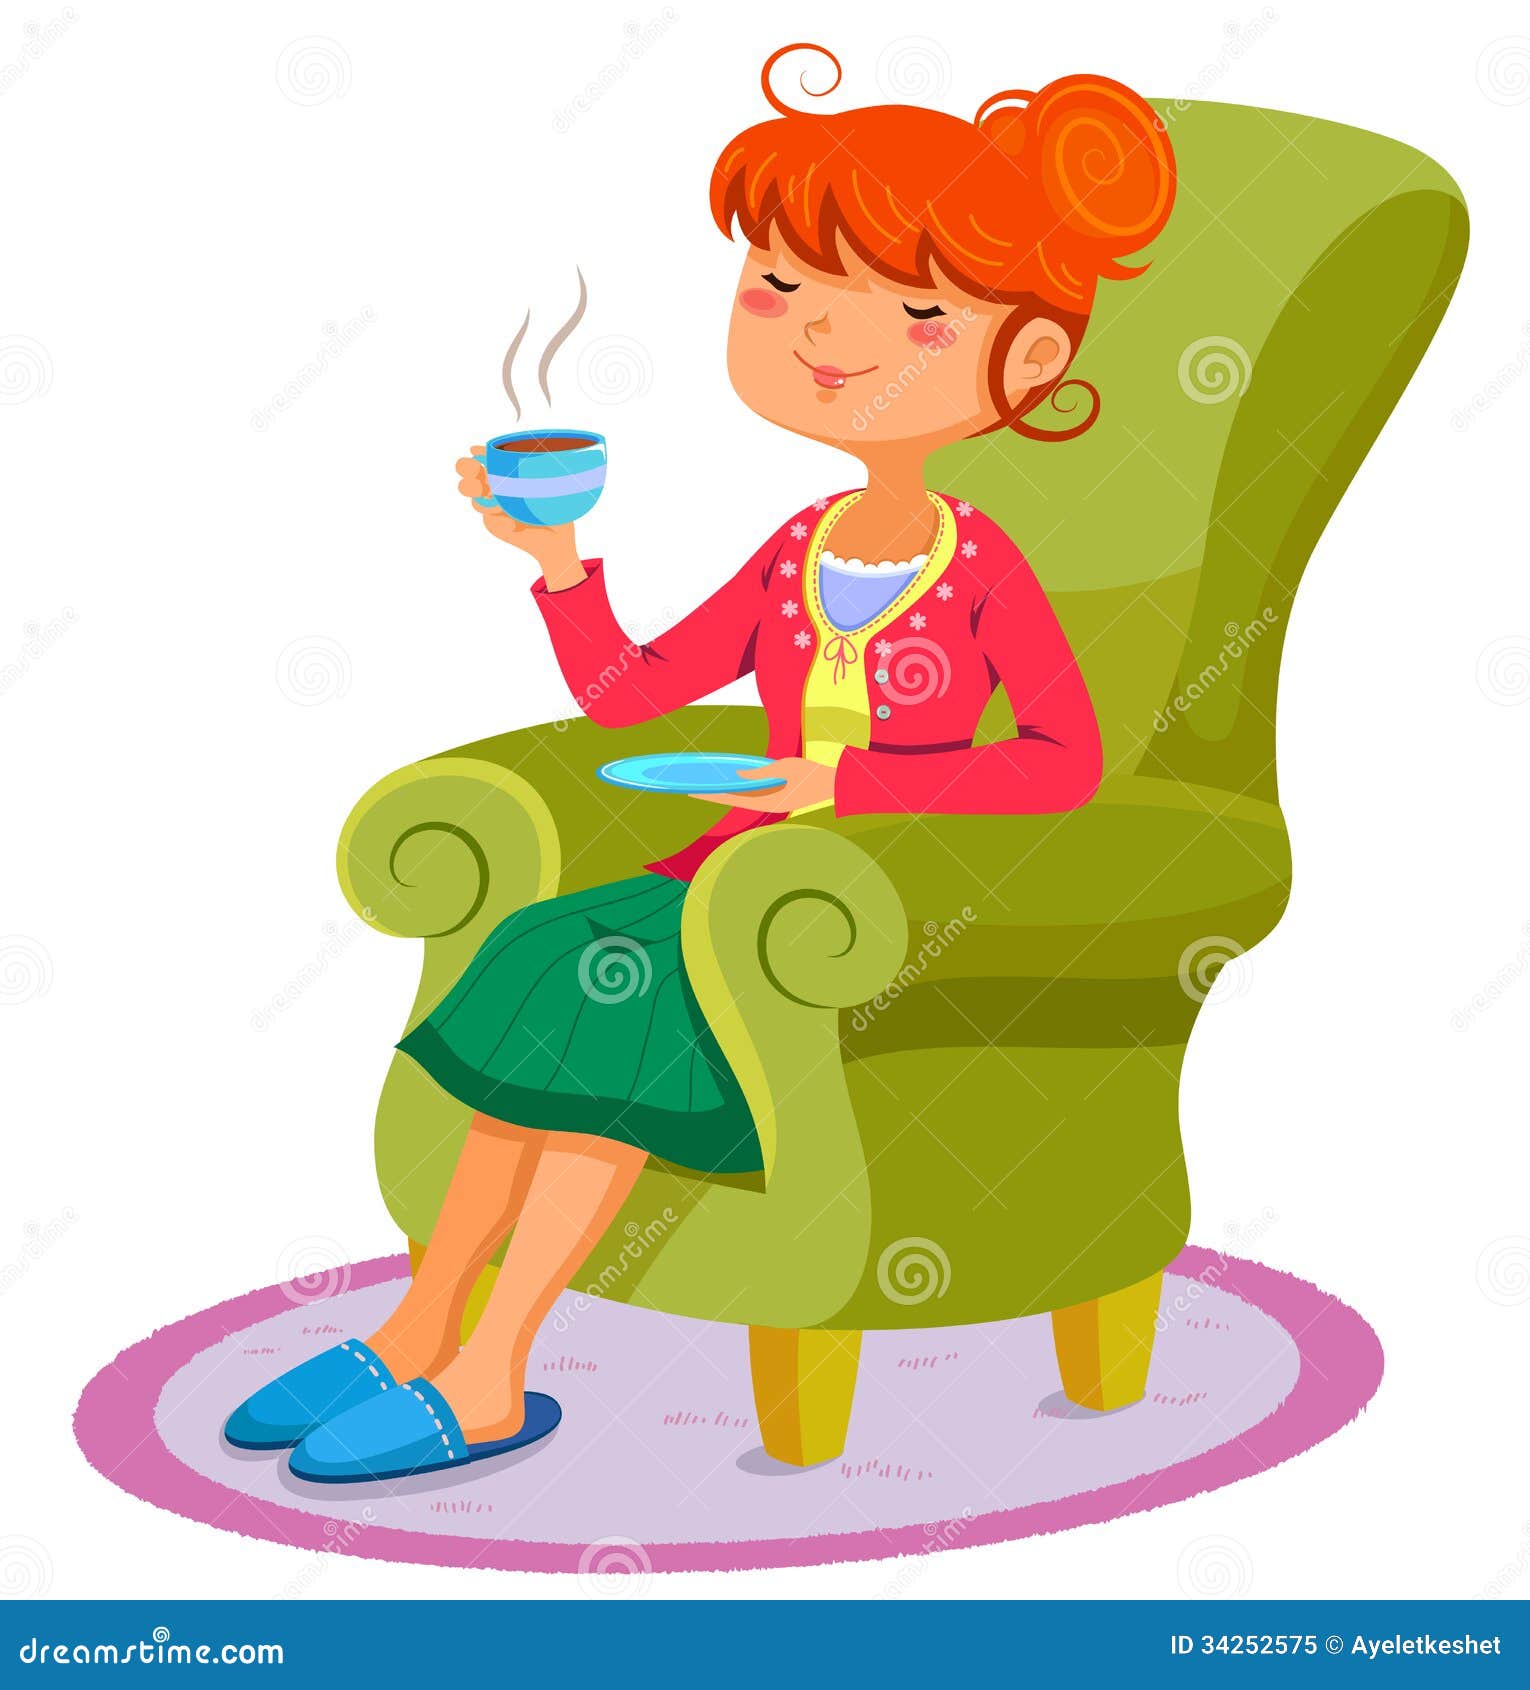 girl relaxing clipart - photo #10